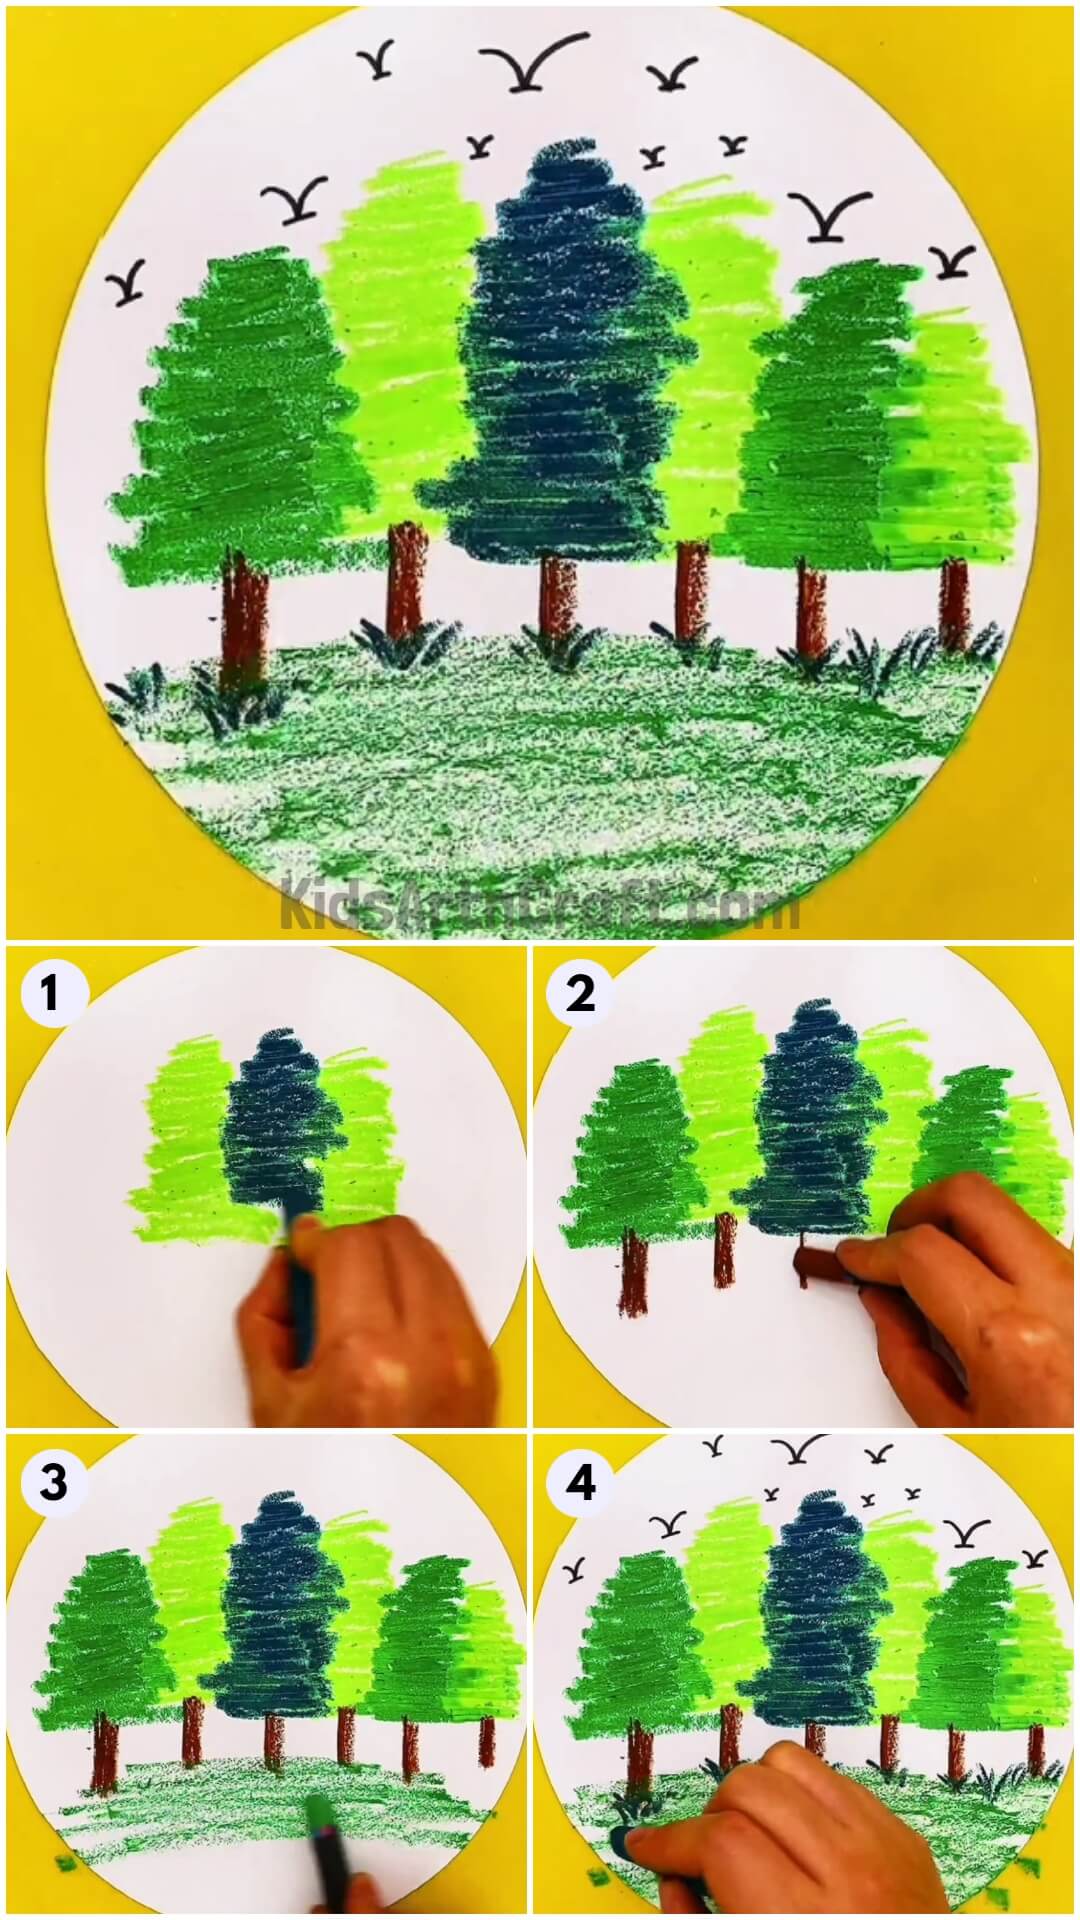  Easy To Make Tree Scenery Using Oil Pastels Tutorial For Kids